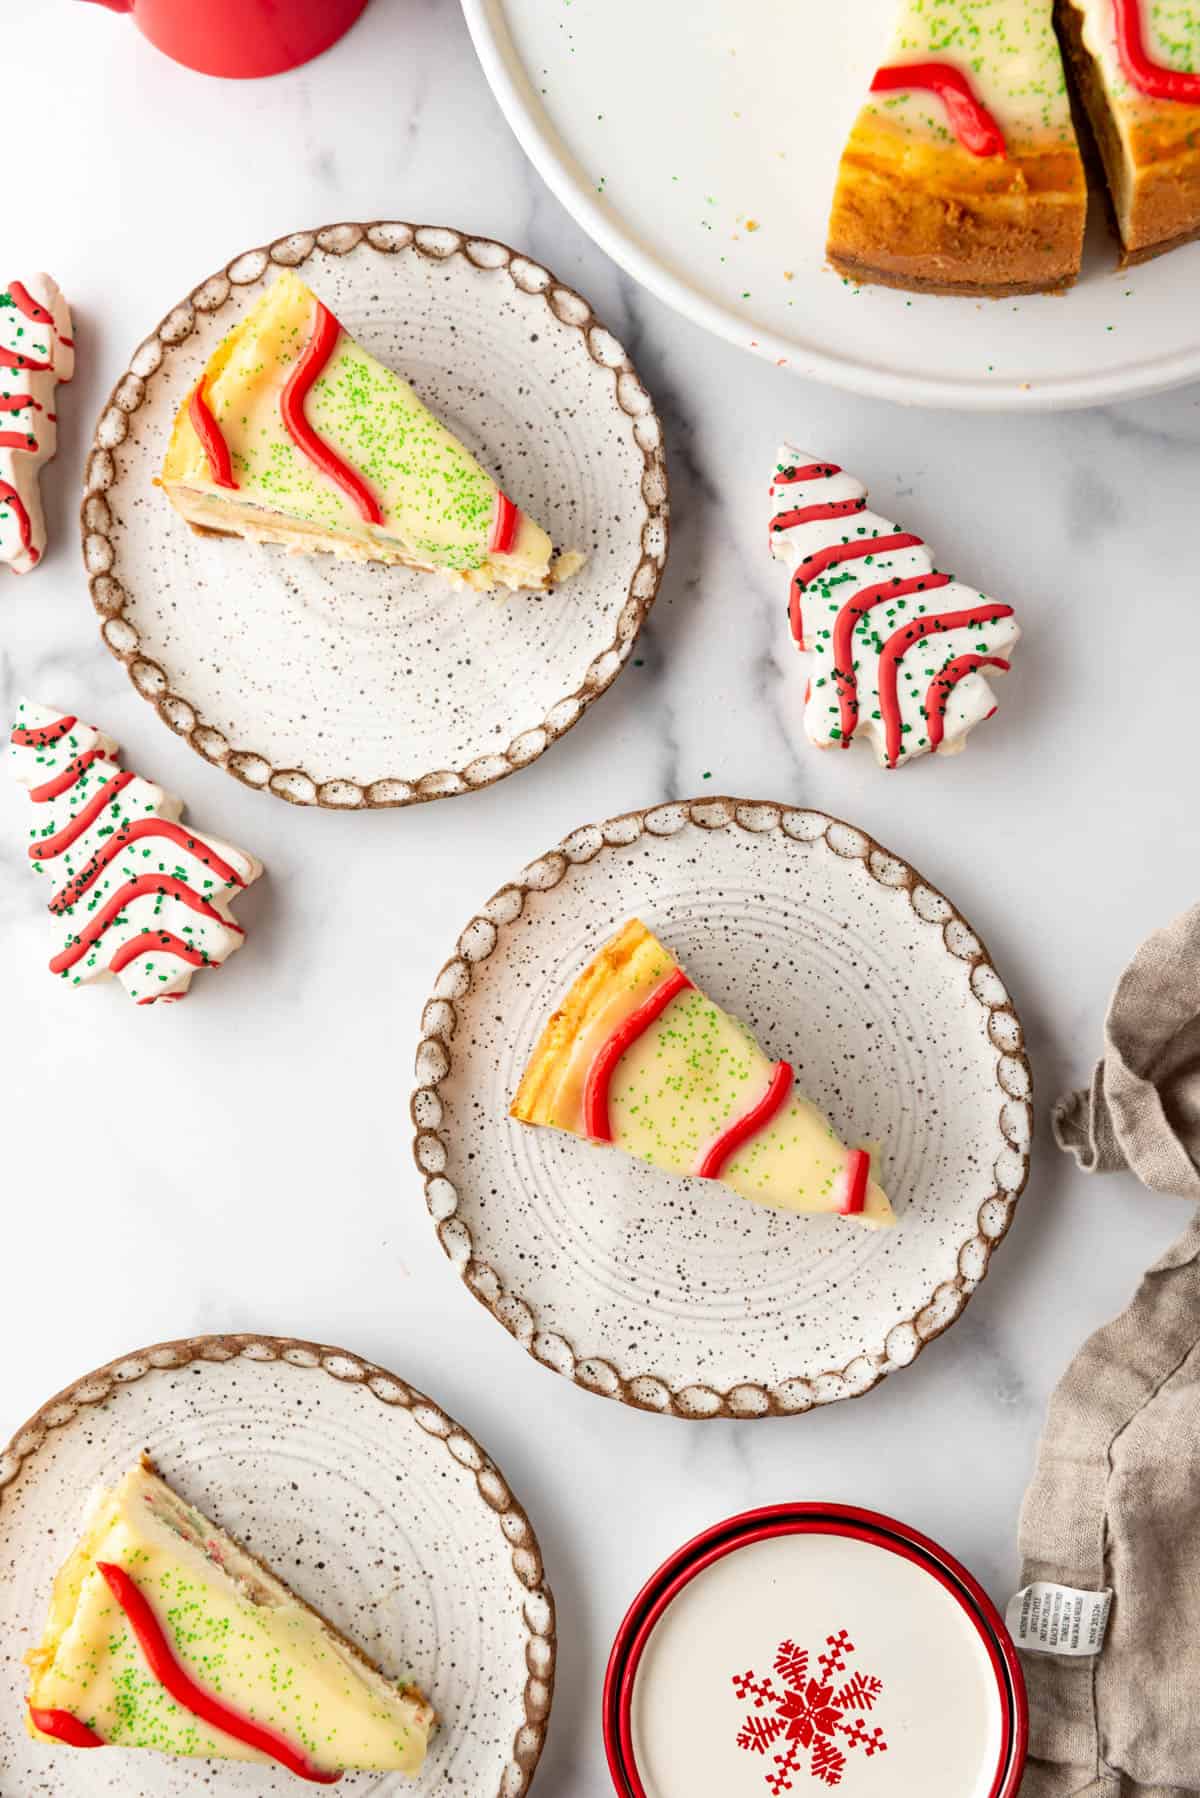 Slices of Little Debbie Christmas Tree Cheesecake on plates.